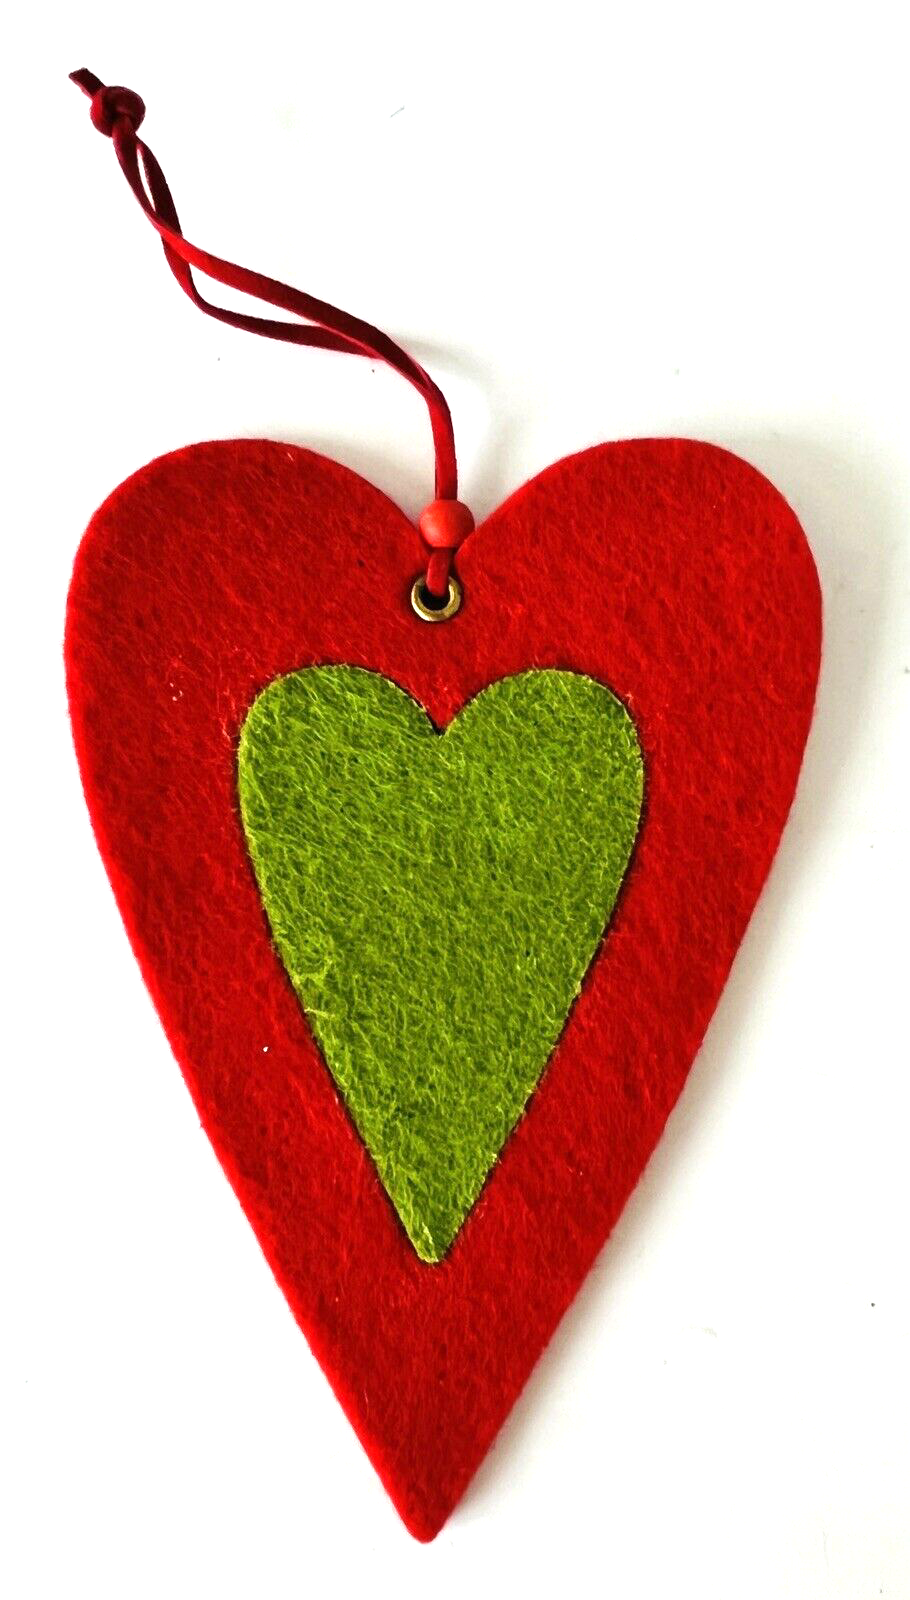 Primary image for Heart Ornament Red & Green Felt Valentine or Christmas Decor 6 x 4"